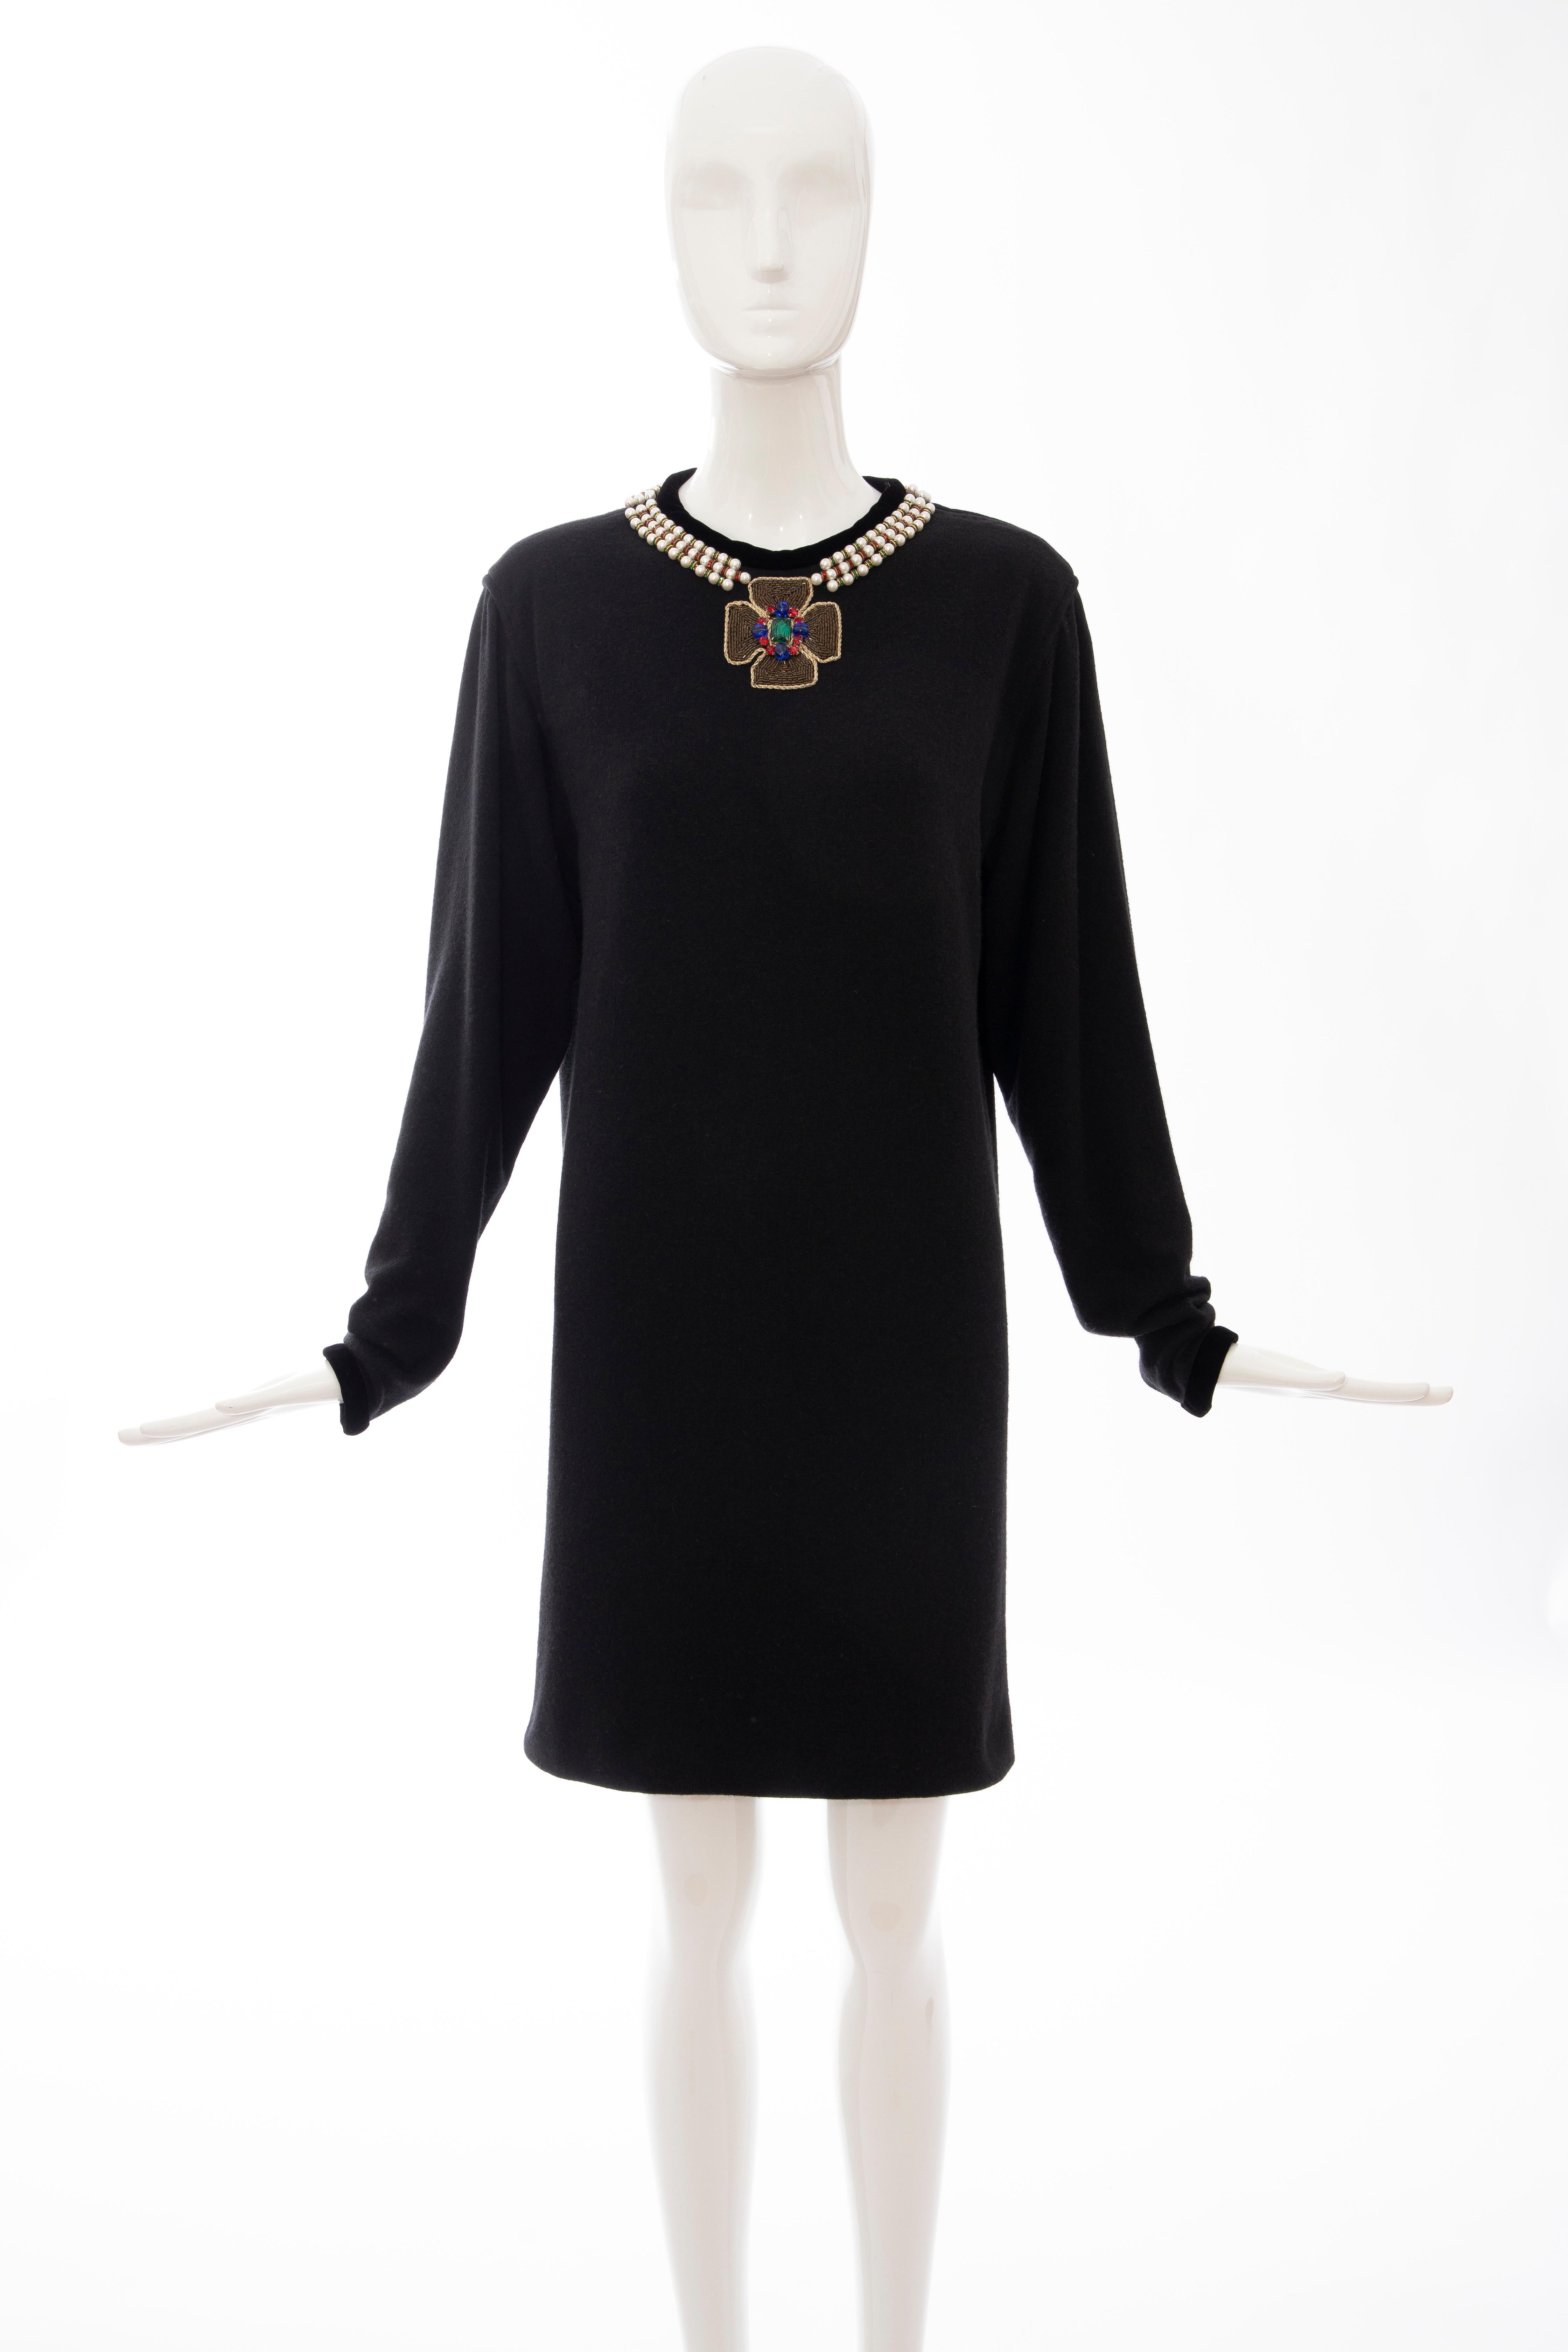 Oscar de la Renta, Runway Fall 1984, black wool sweater dress with pearl & rondelle spacer  glass rhinestones embroidered neckline, black velvet trim crew neck and sleeve detail with zip closure at shoulder and fully lined in black silk.

US.